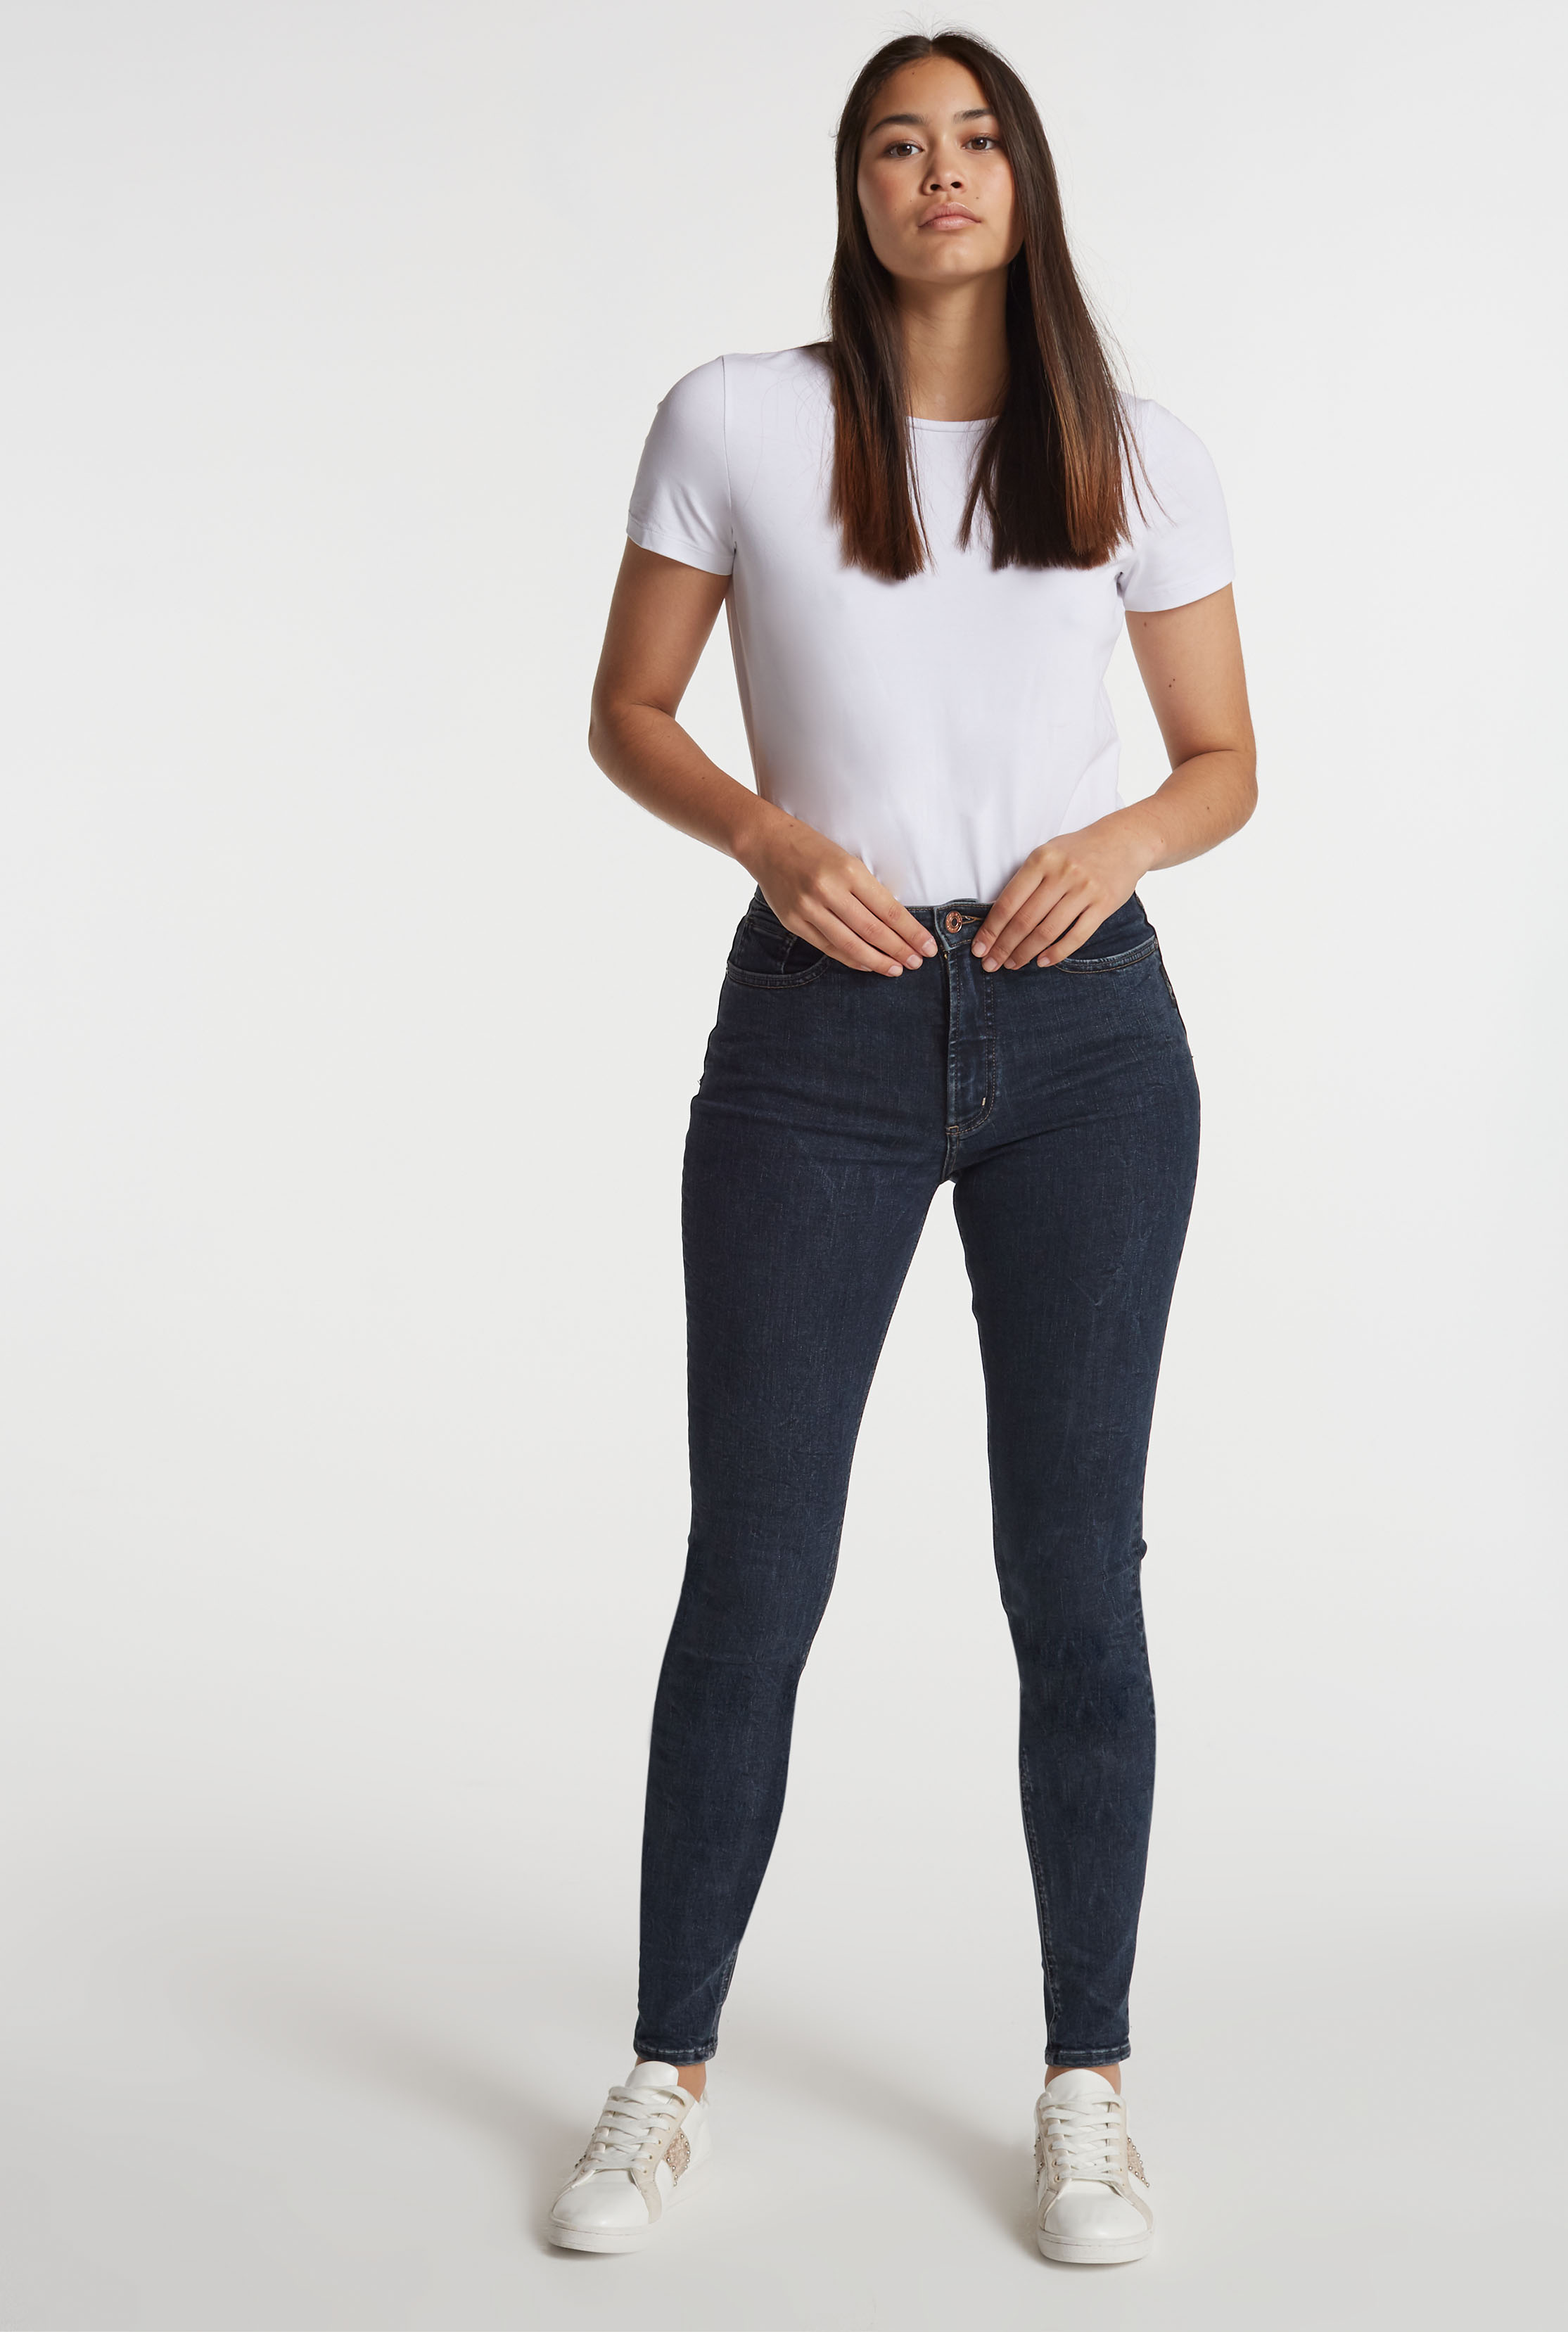 Silver Calley Skinny Jean | Long Tall Sally